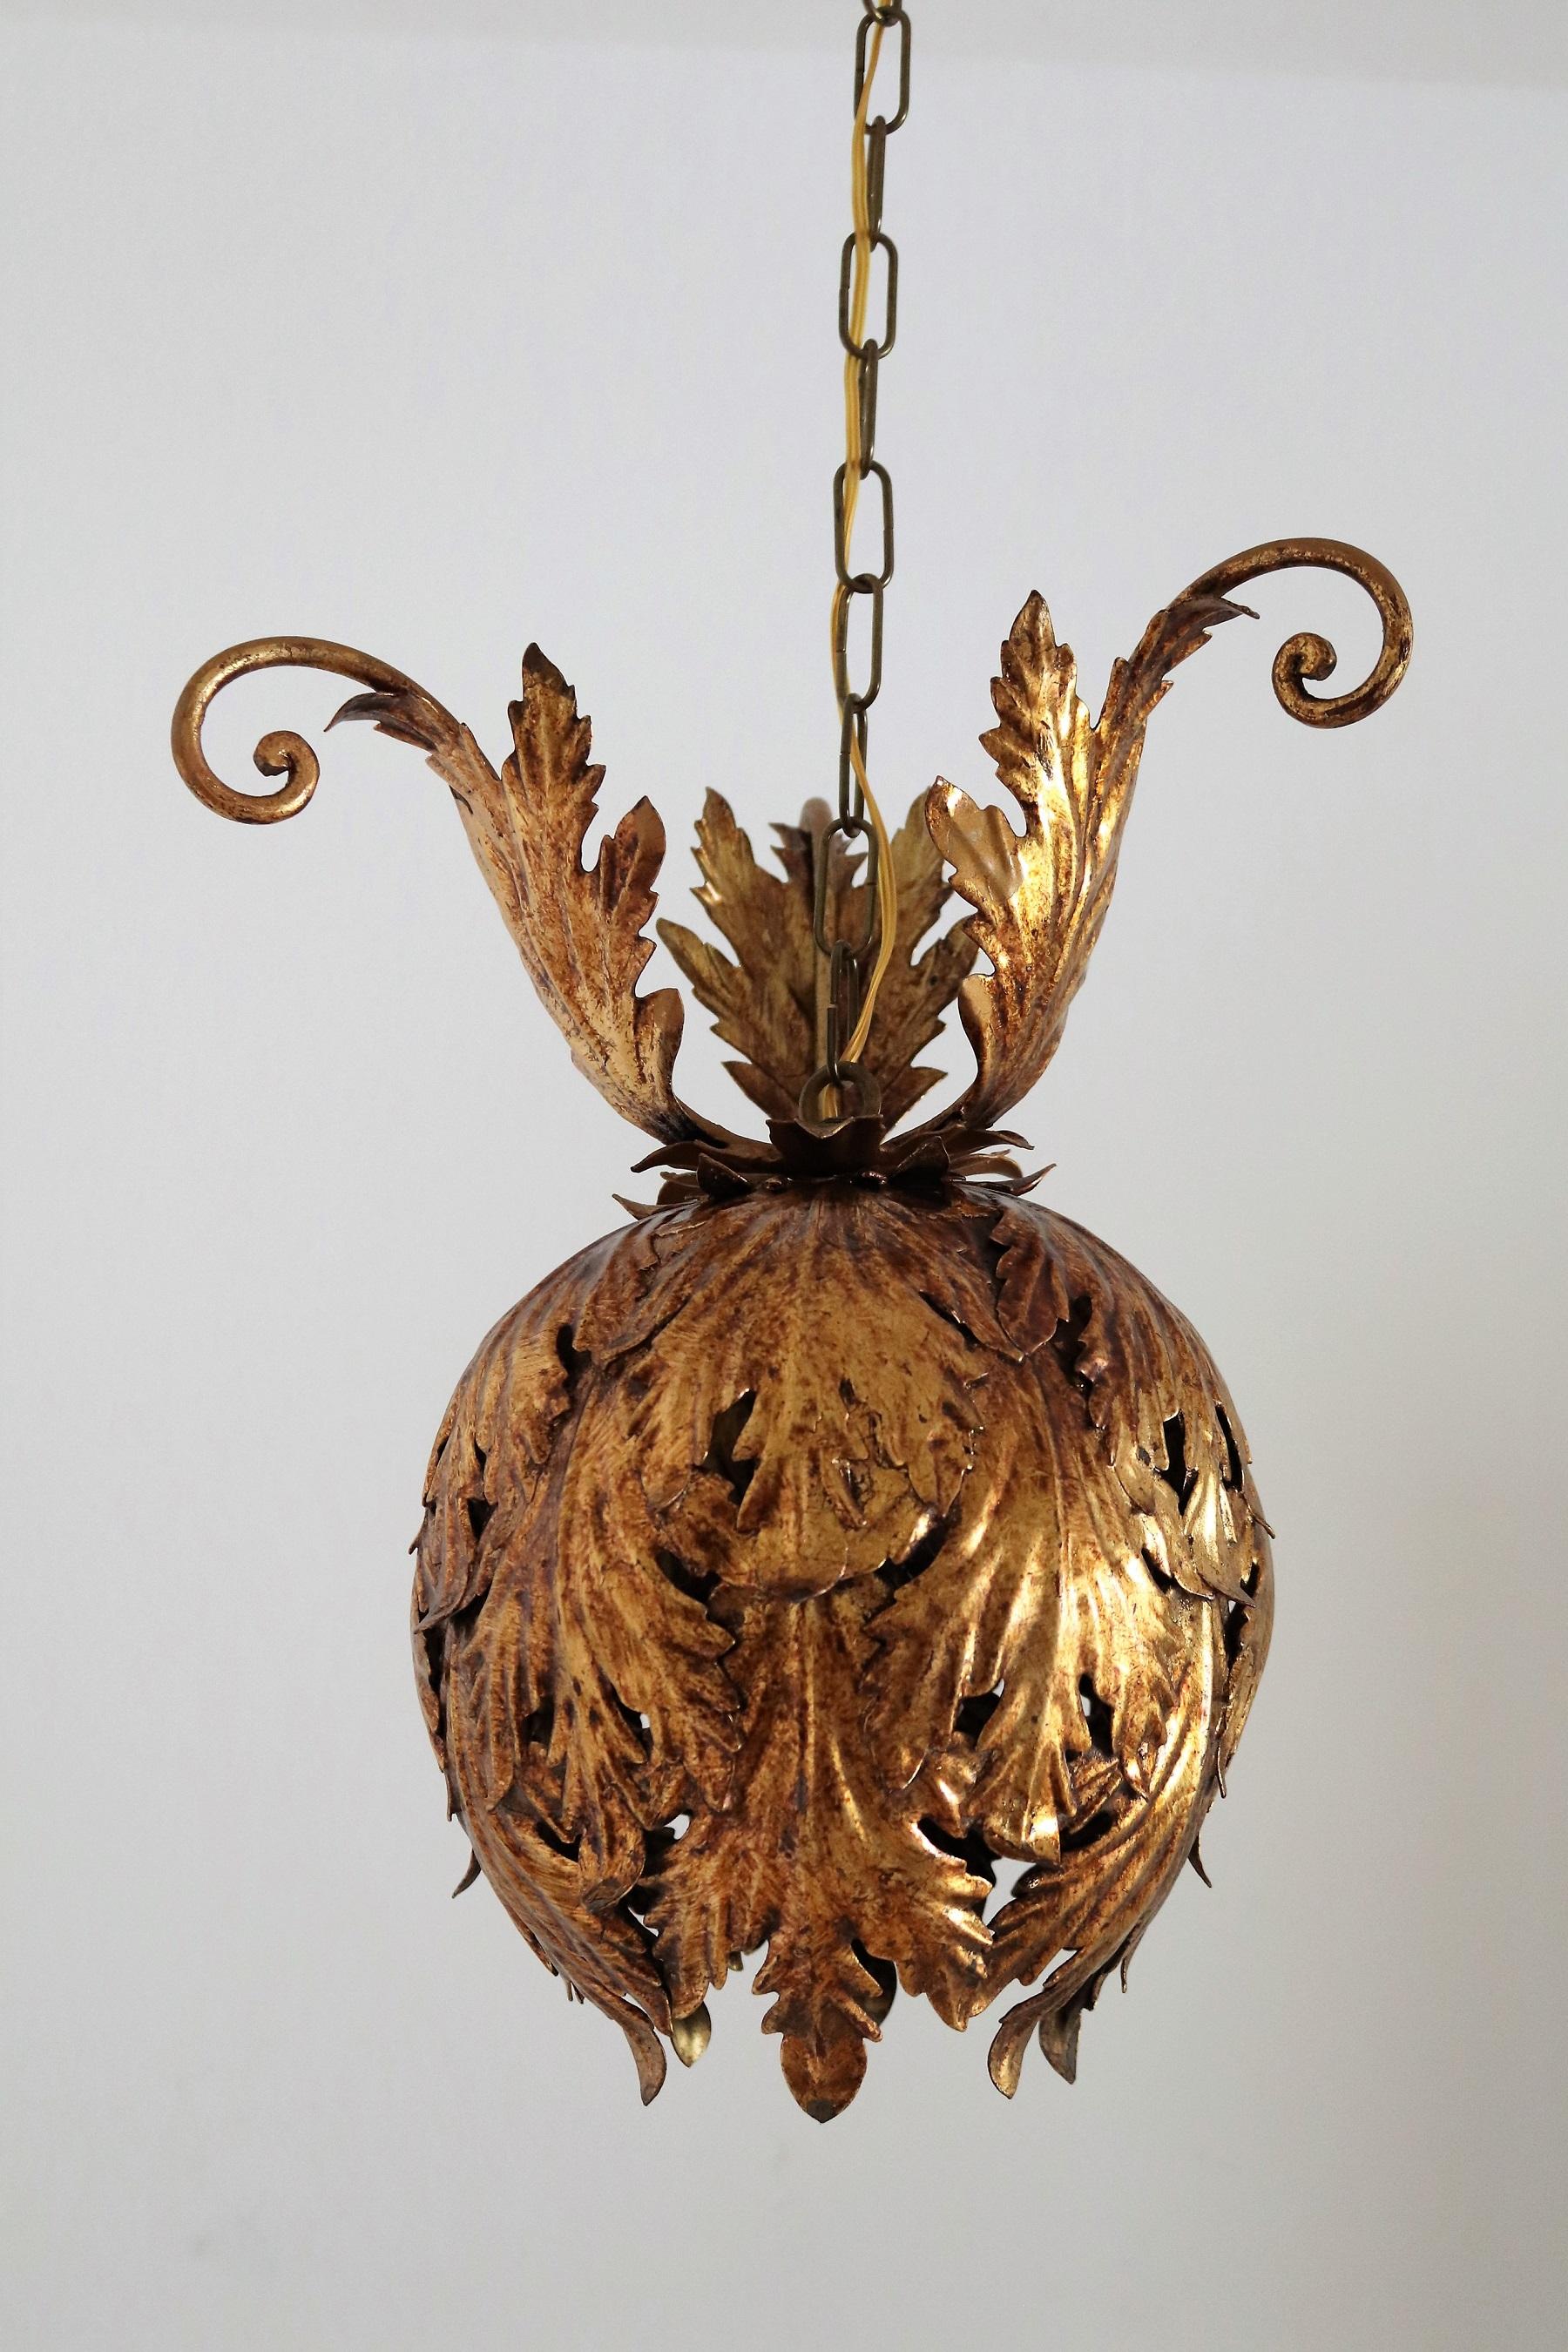 Italian Midcentury Gilt Metal Pendant Lamp with Leaves for Hans Kögl, 1960s For Sale 9